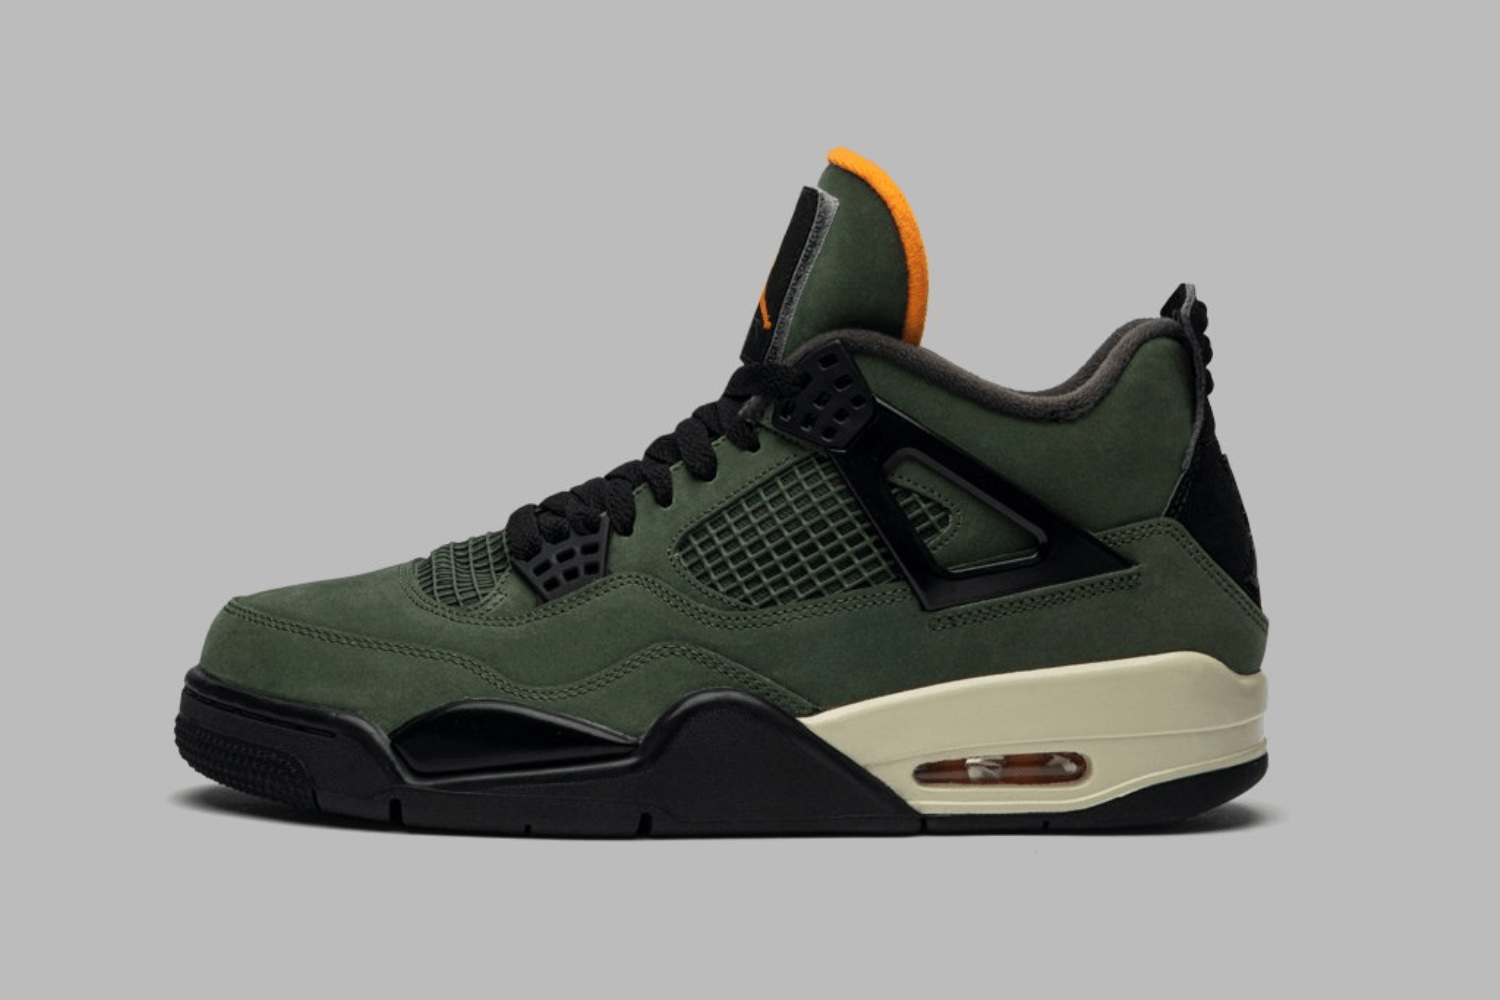 The UNDEFEATED x Air Jordan 4 is making its comeback